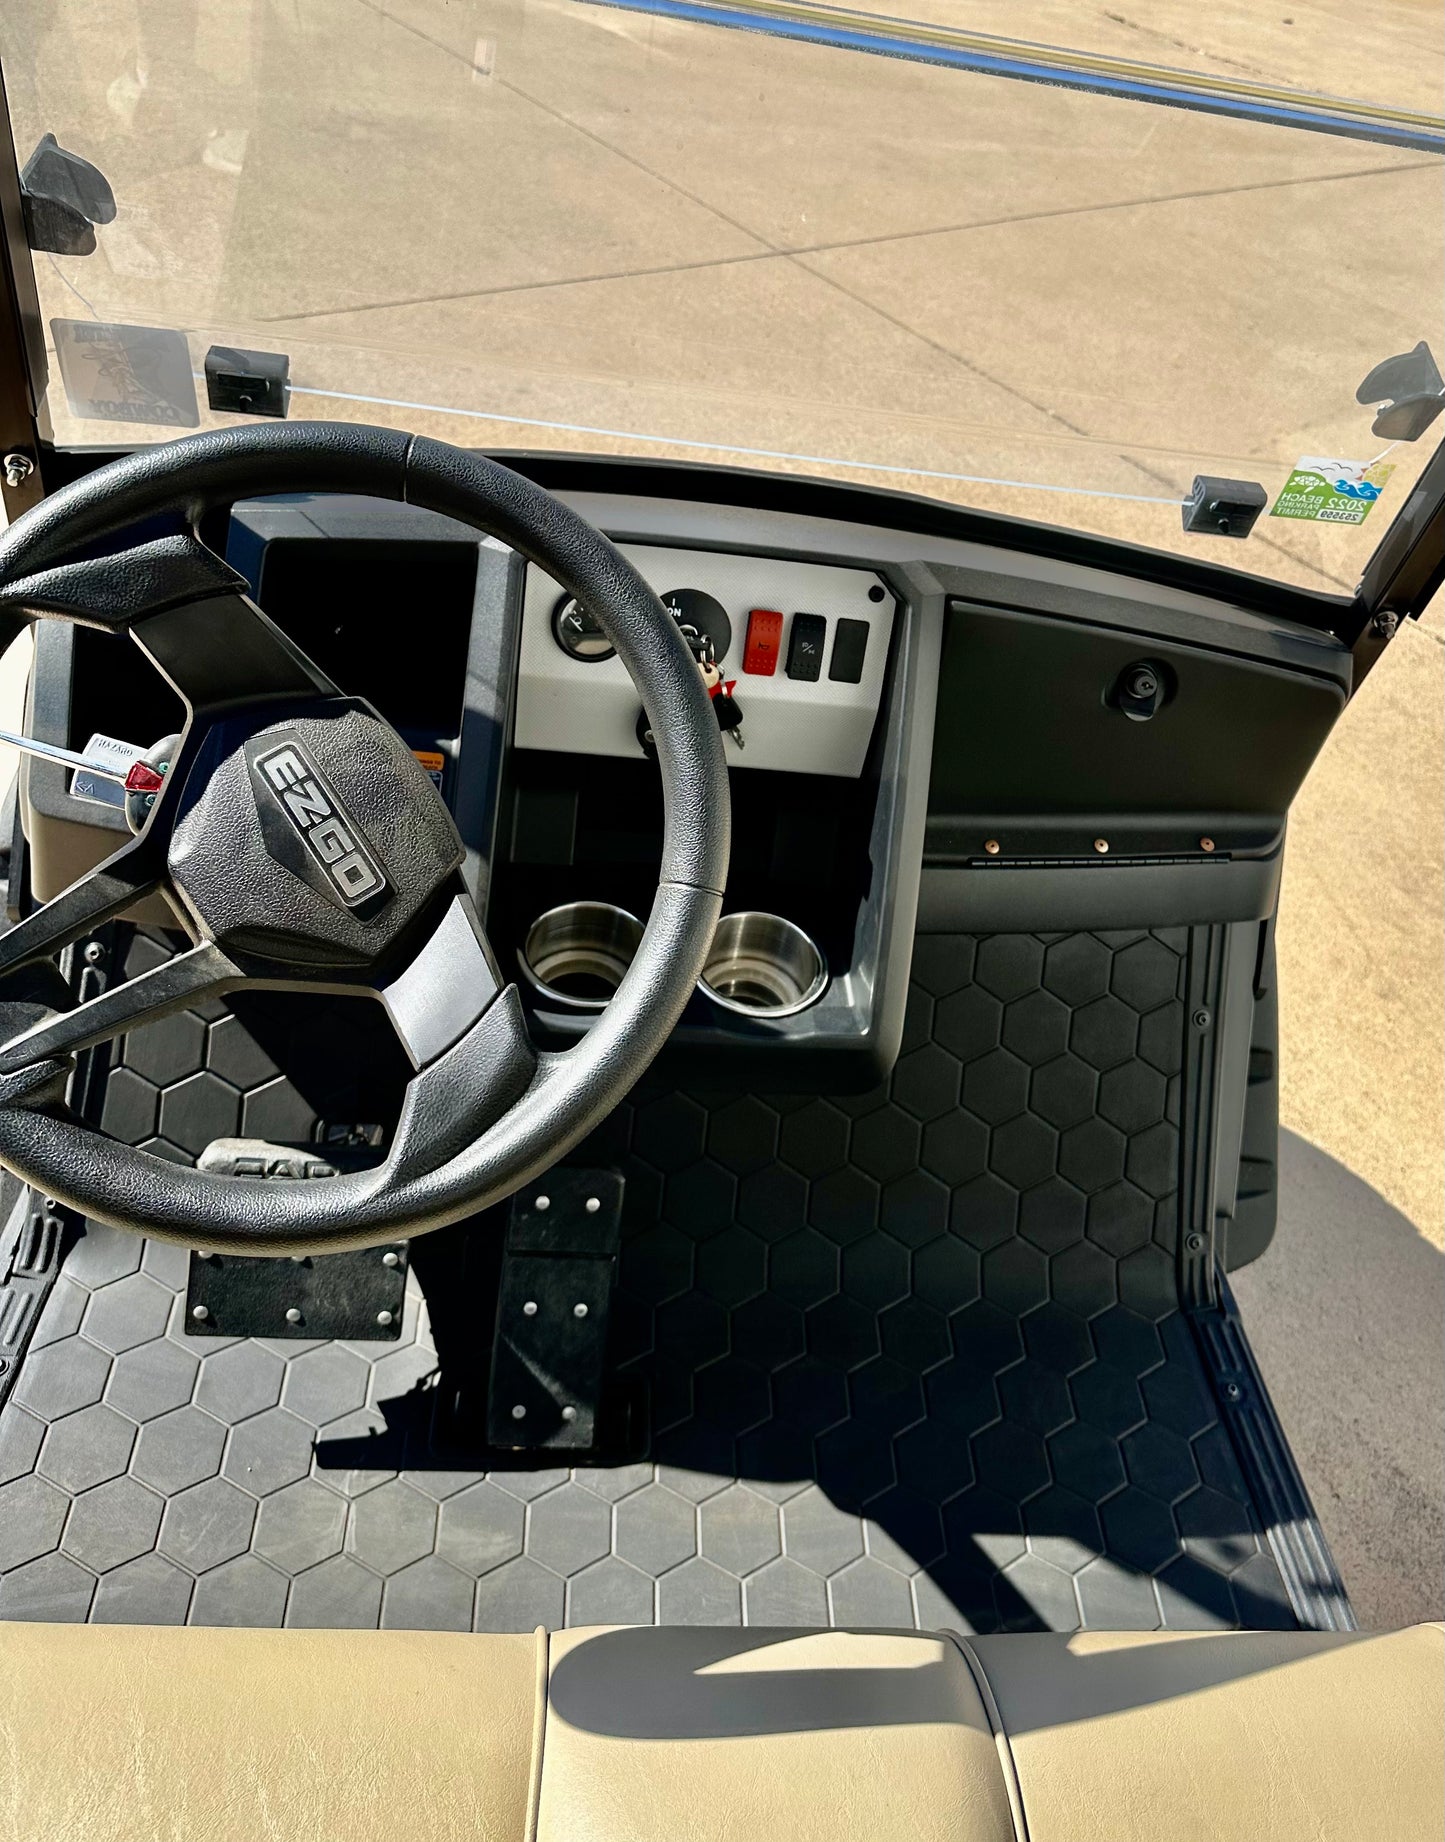 PRE-OWNED EZGO S4 EFI GAS/SOLD